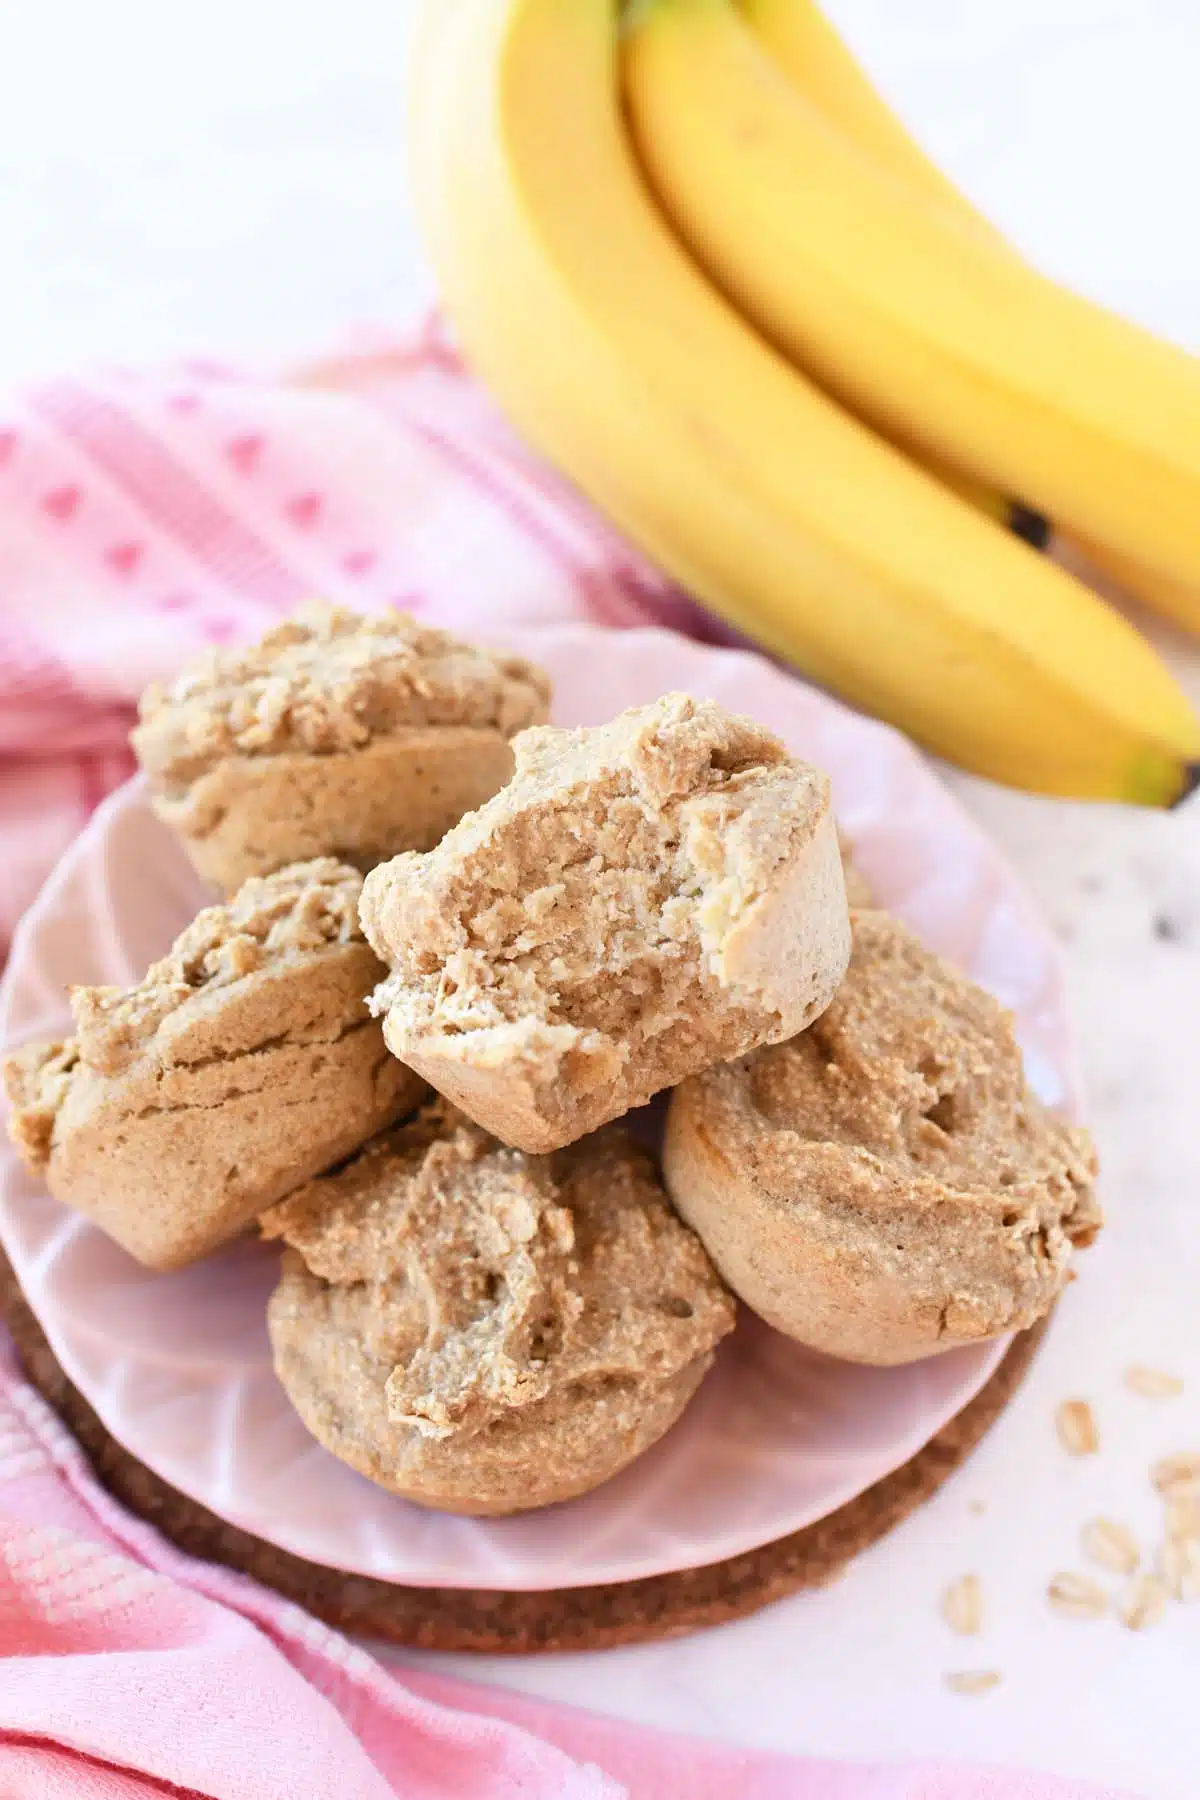 3 ingredients muffins on a pink plate with yellow bananas.